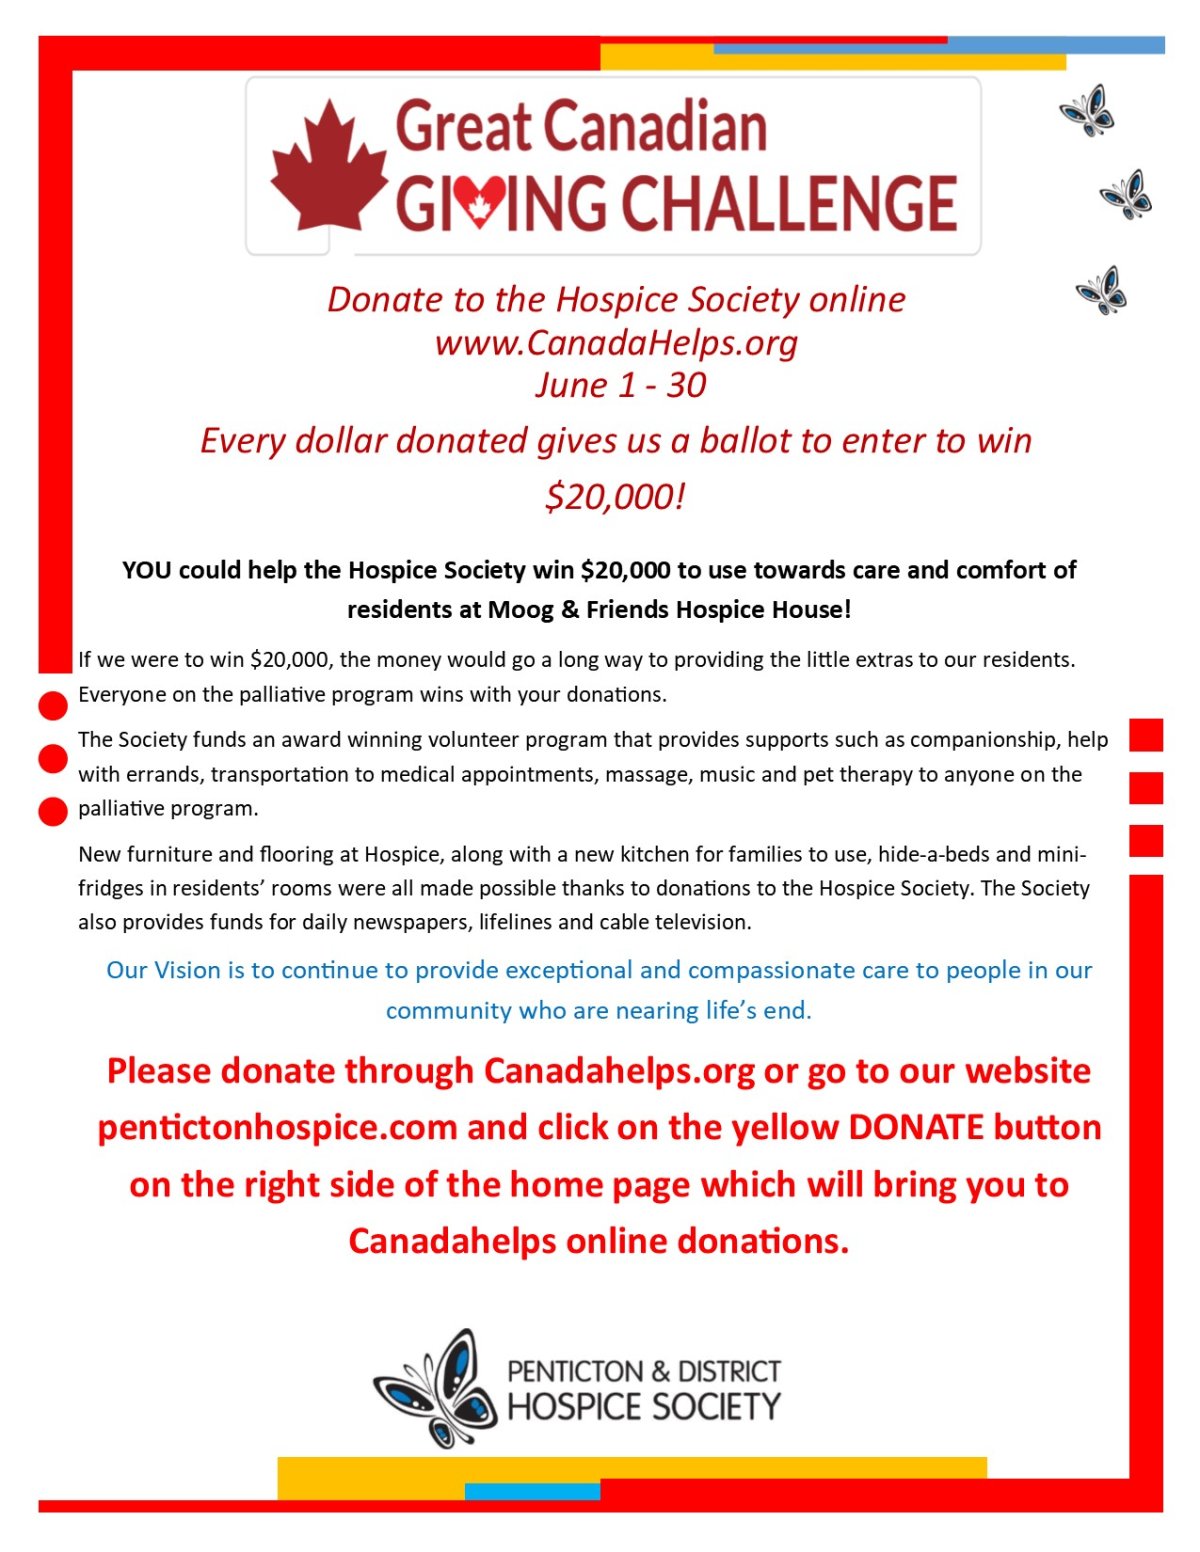 Penticton & District Hospice Society Great Canadian Giving Challenge - image